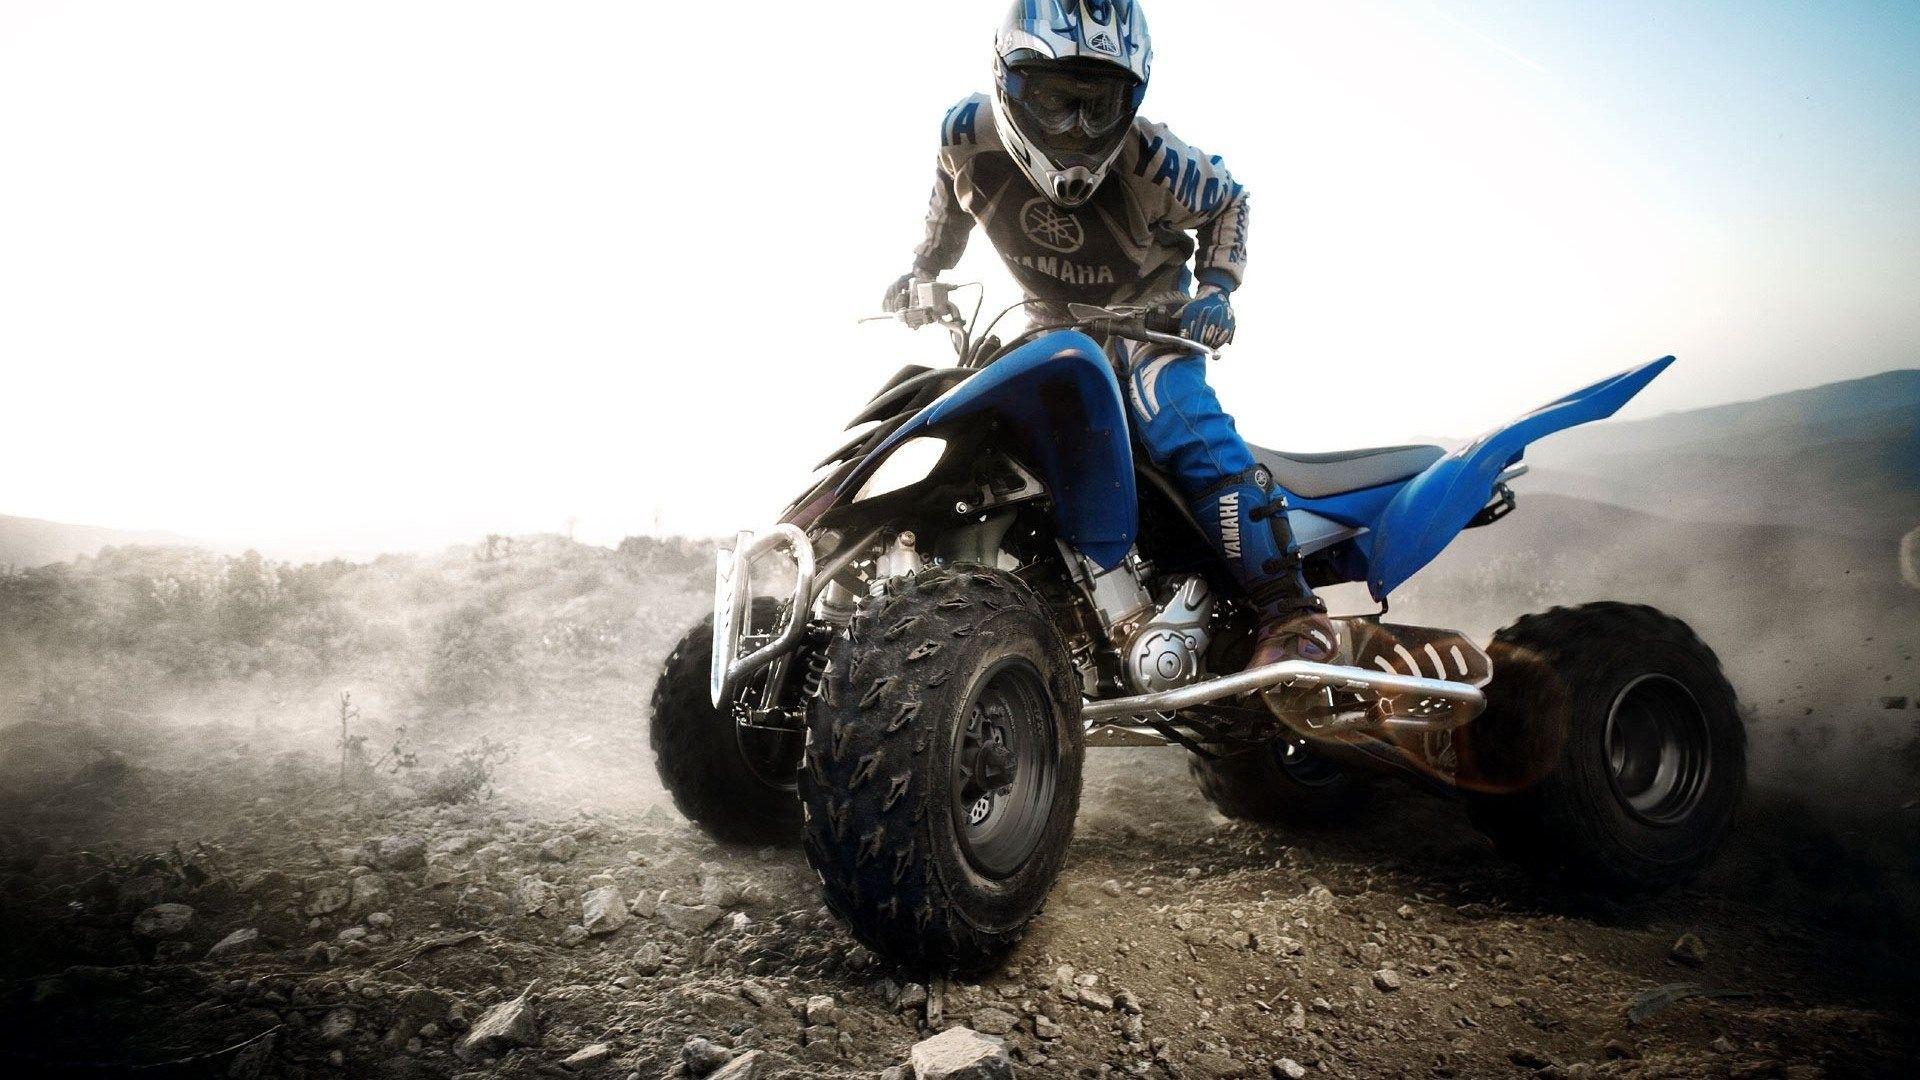 something I love to do is ride quads. I have always found it so